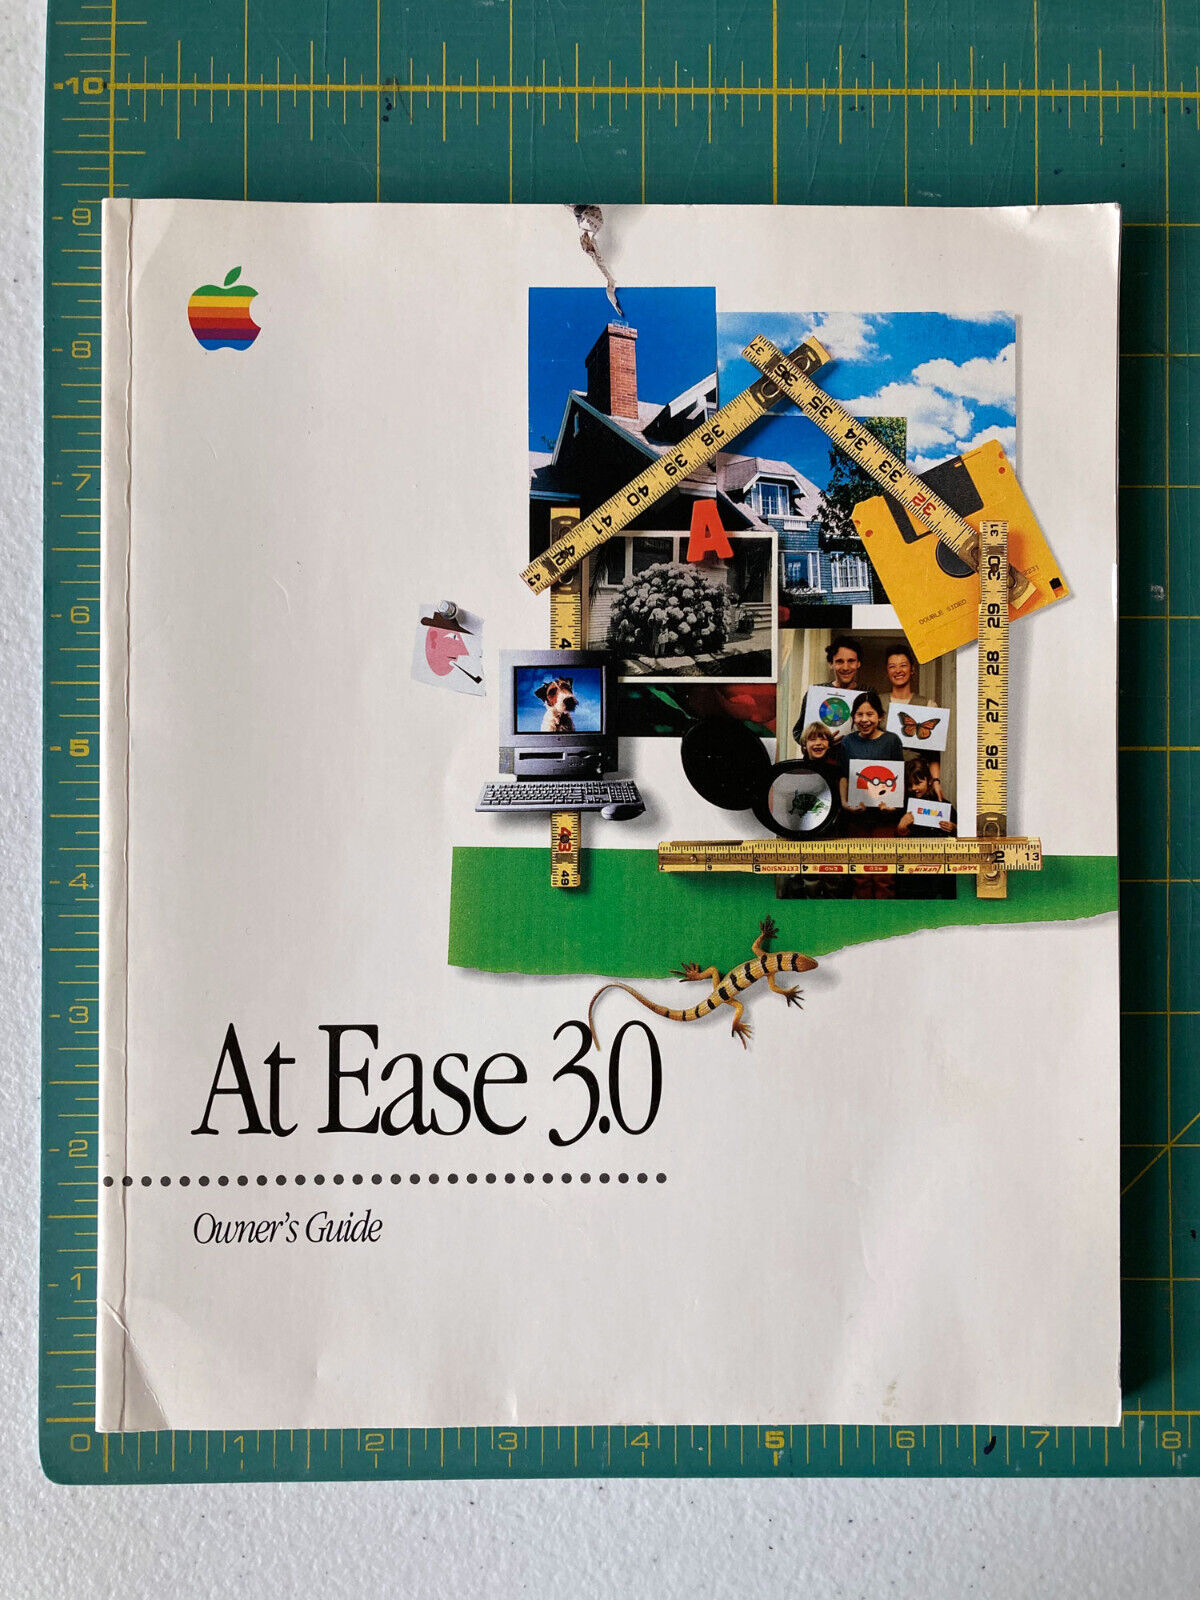 Vintage Apple Manual for At Ease 3.0 (1995) Manual Only - NO SOFTWARE DISC